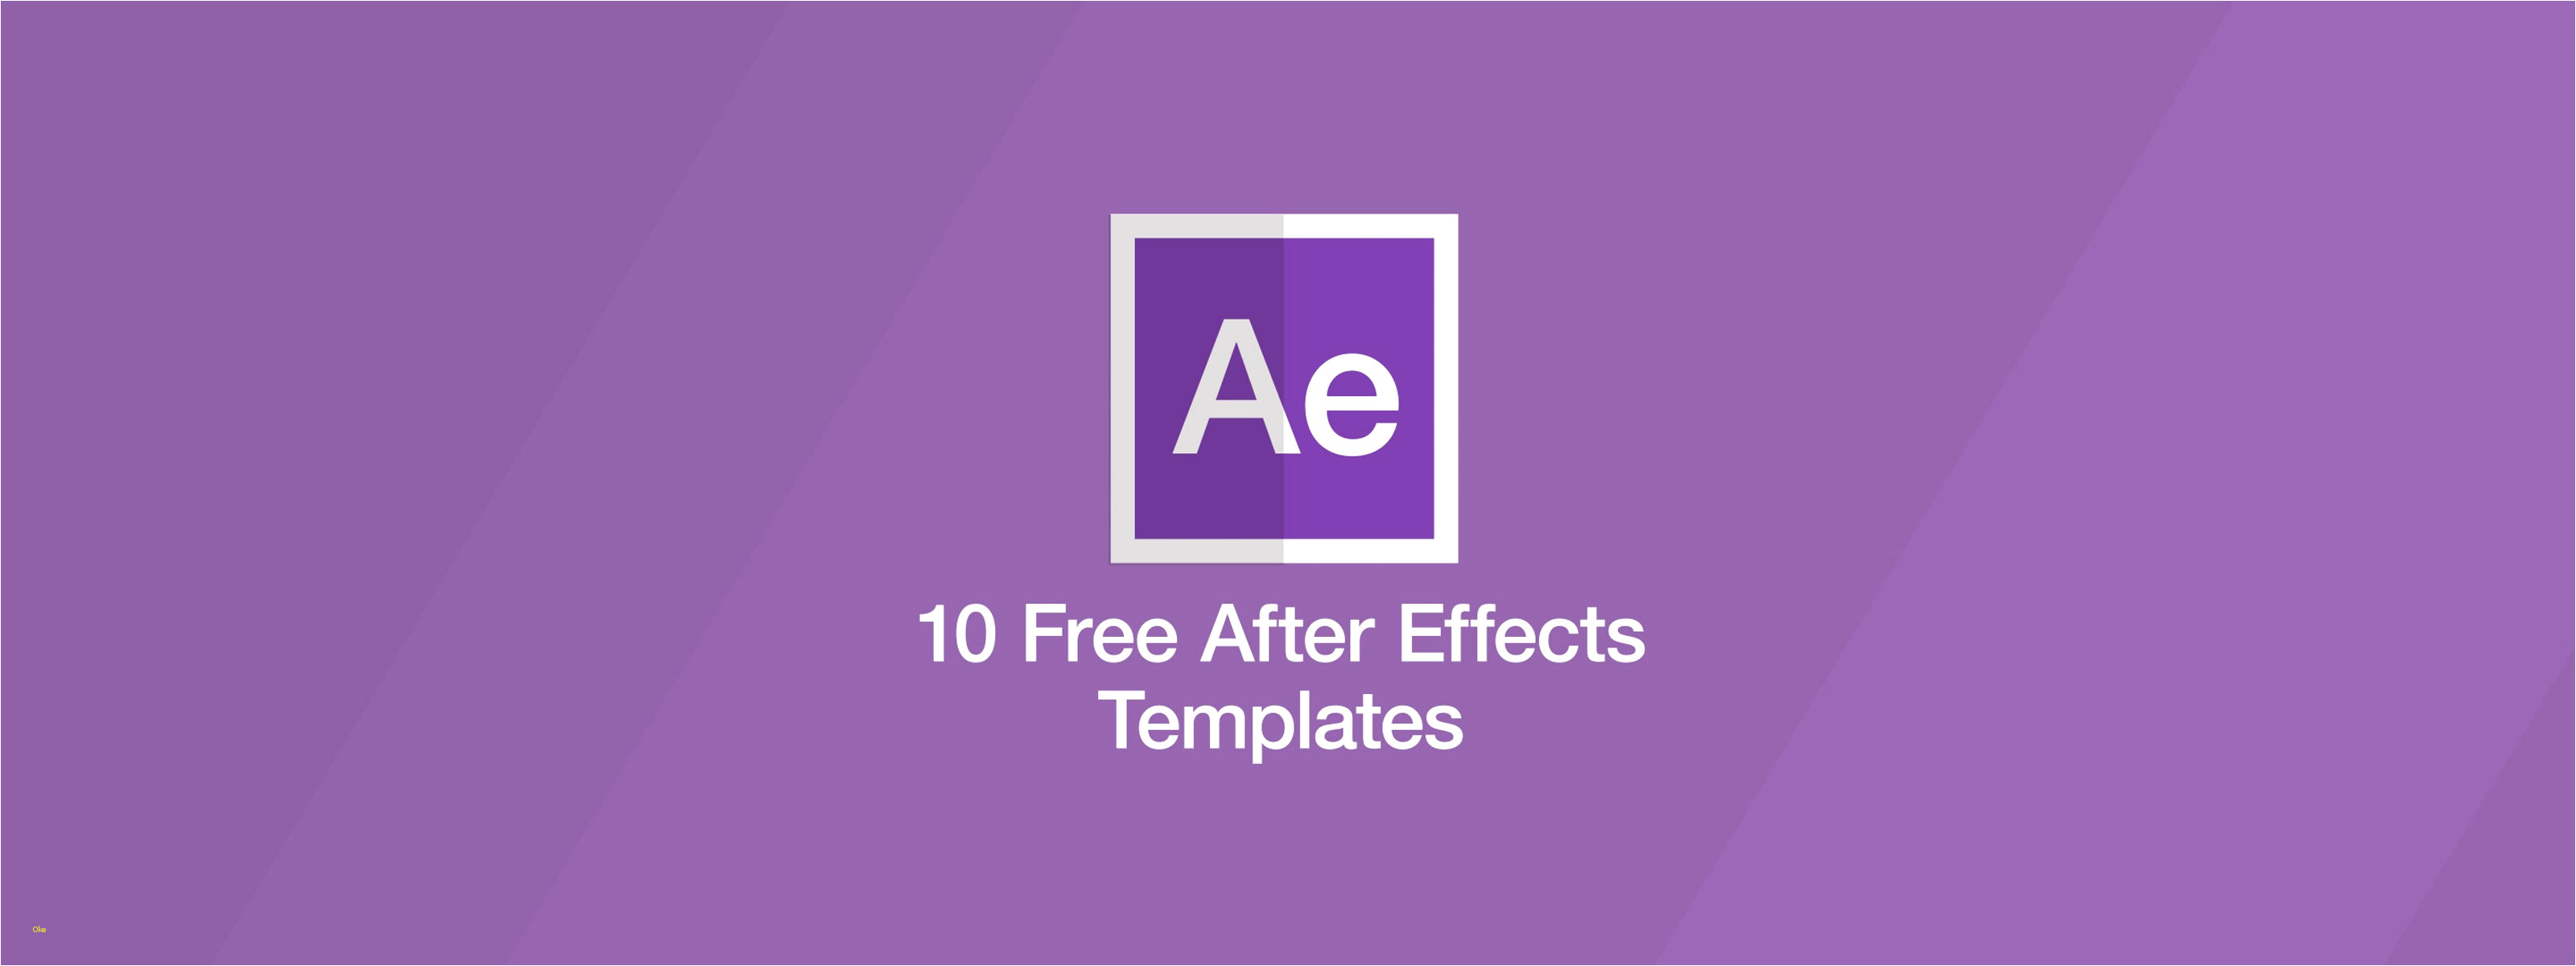 after effects templates free download